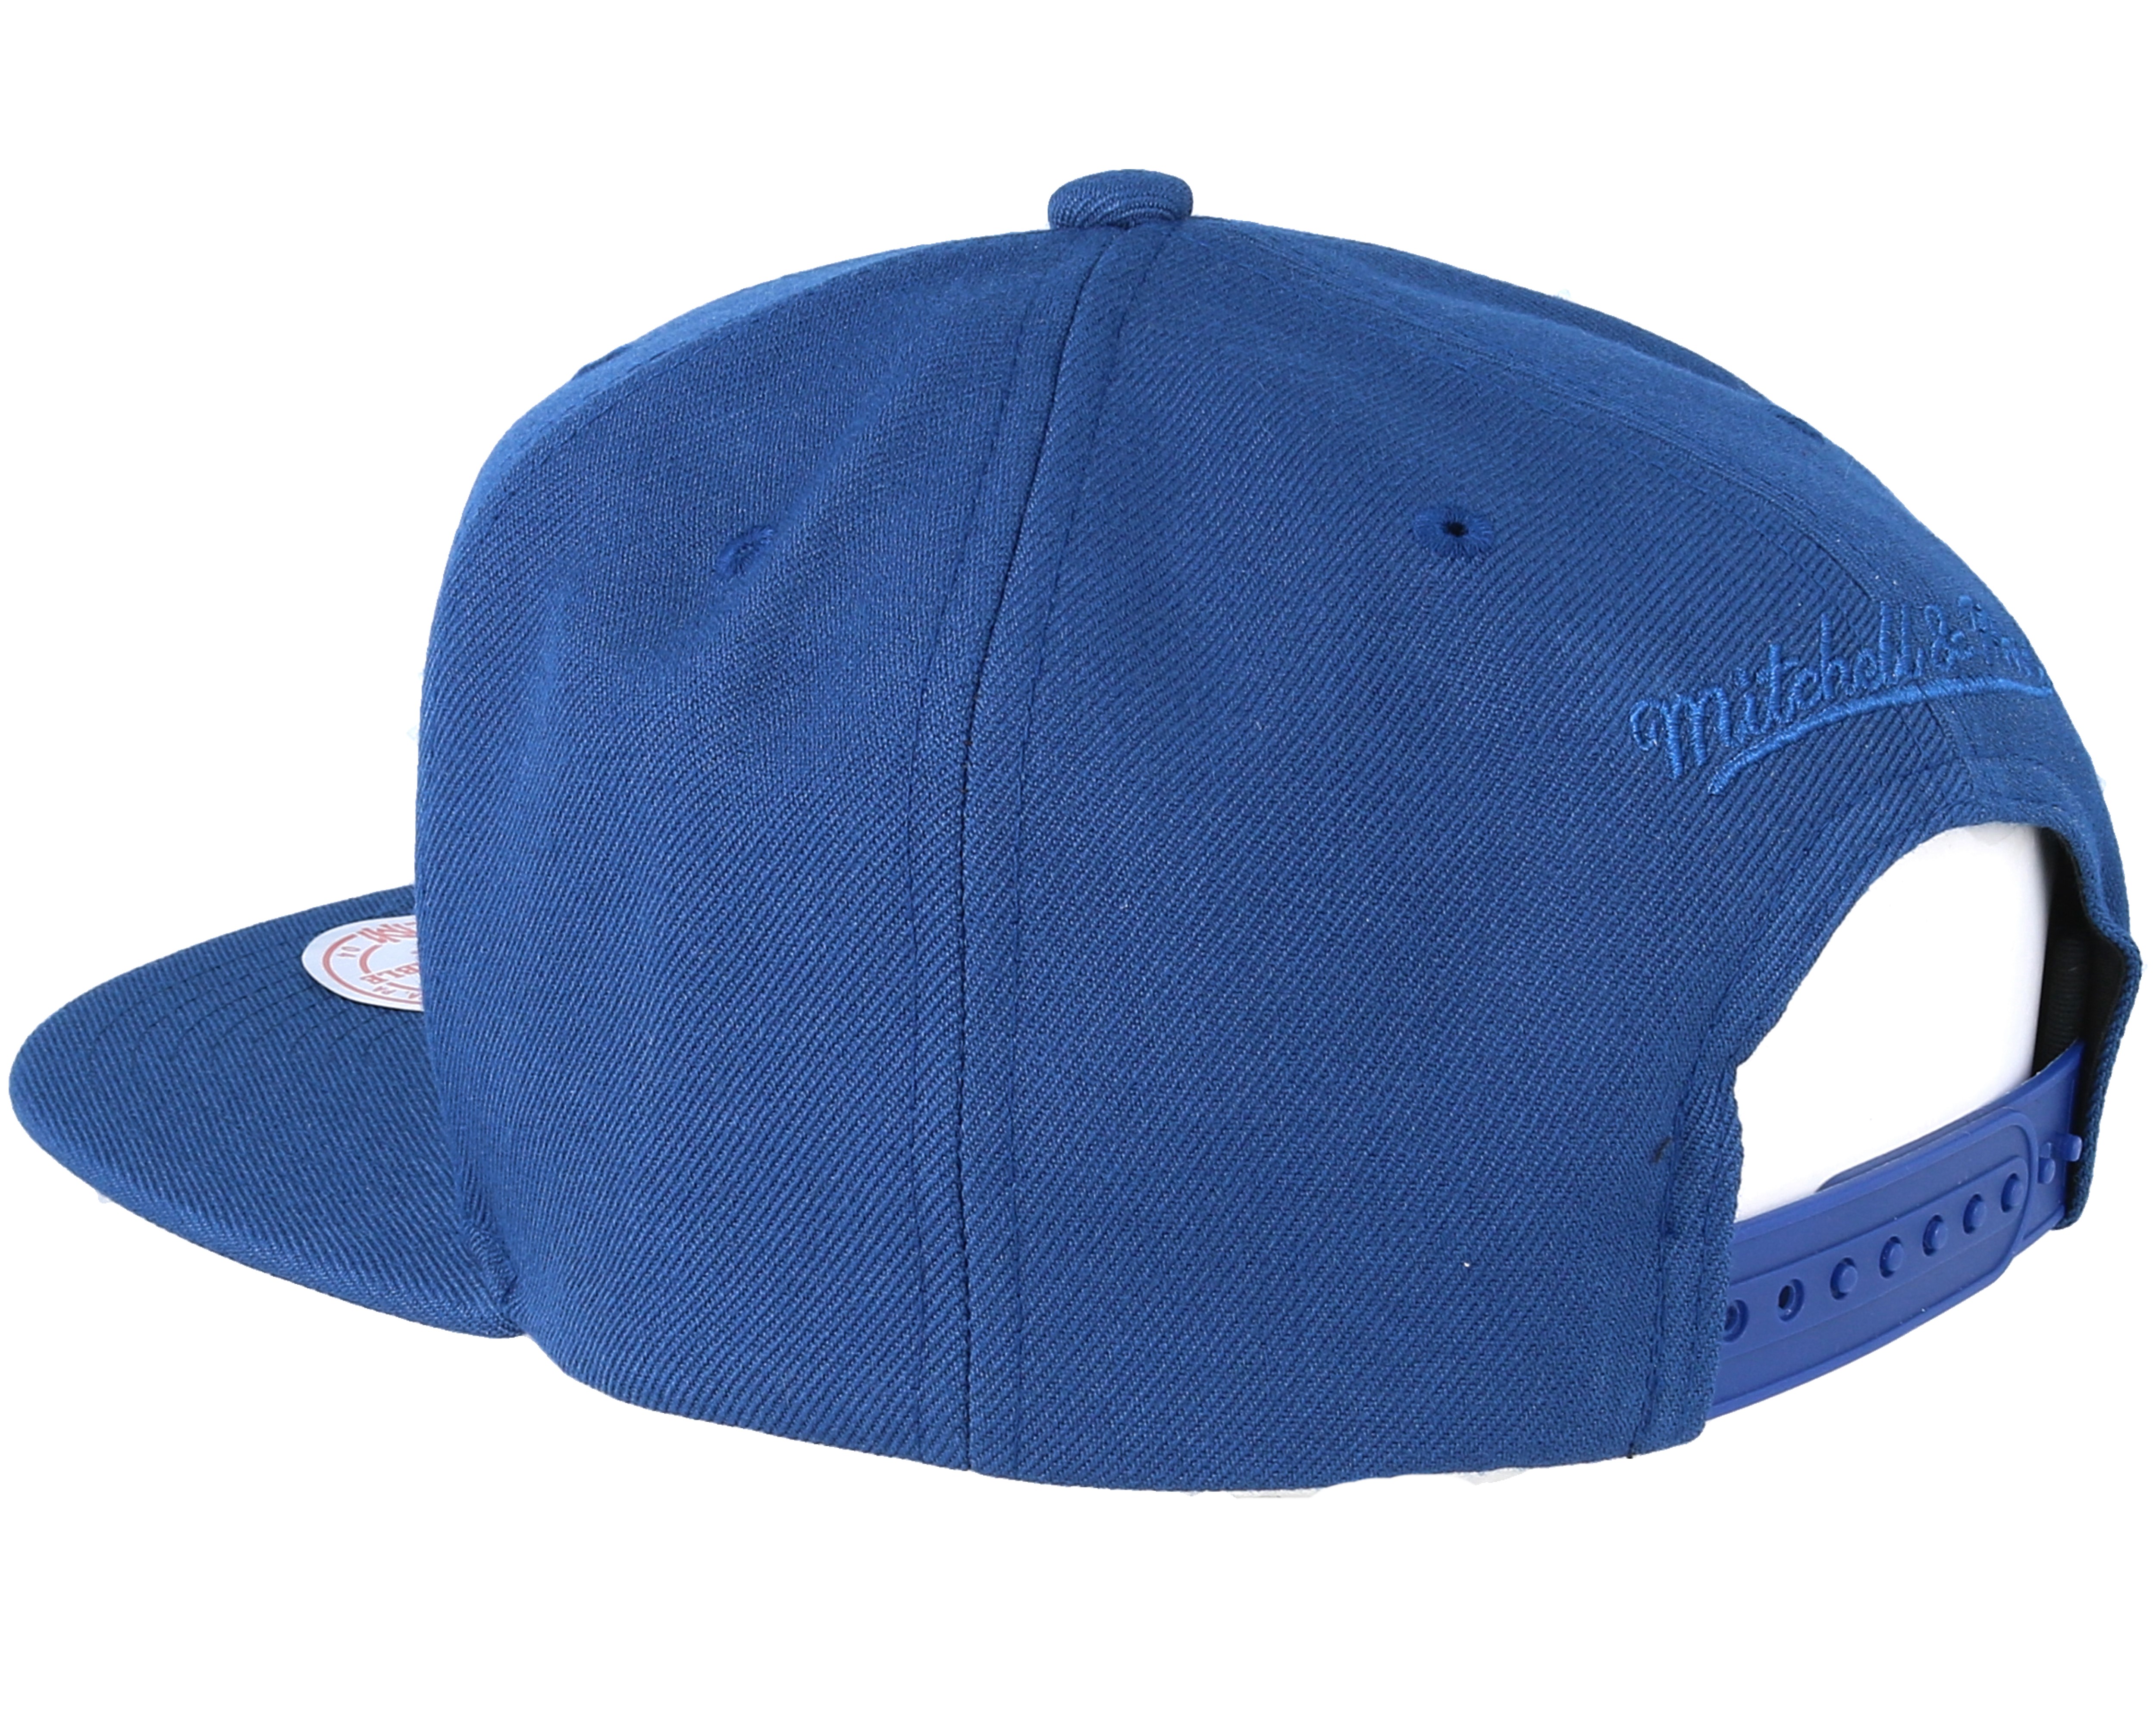 Blank Blue Snapback Mitchell And Ness Caps